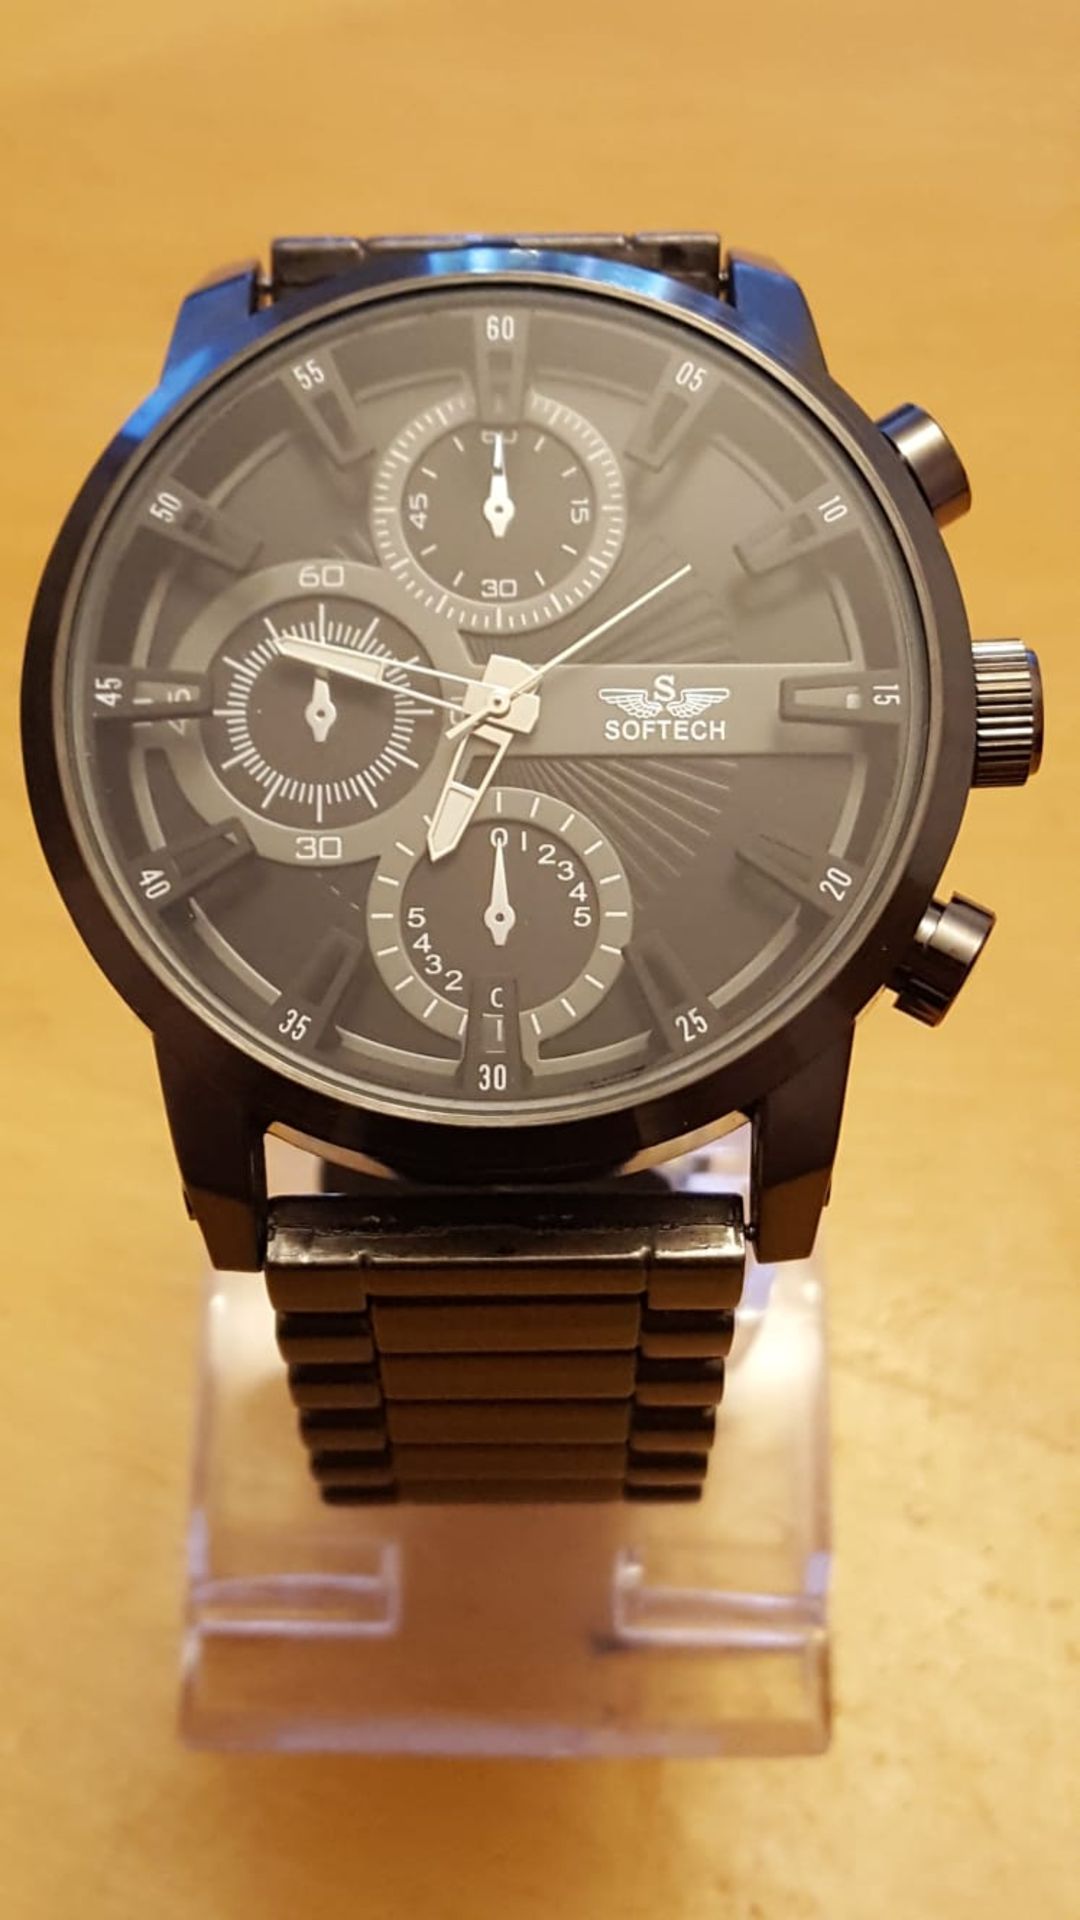 Brand New Softech Gents Dual Time Watch